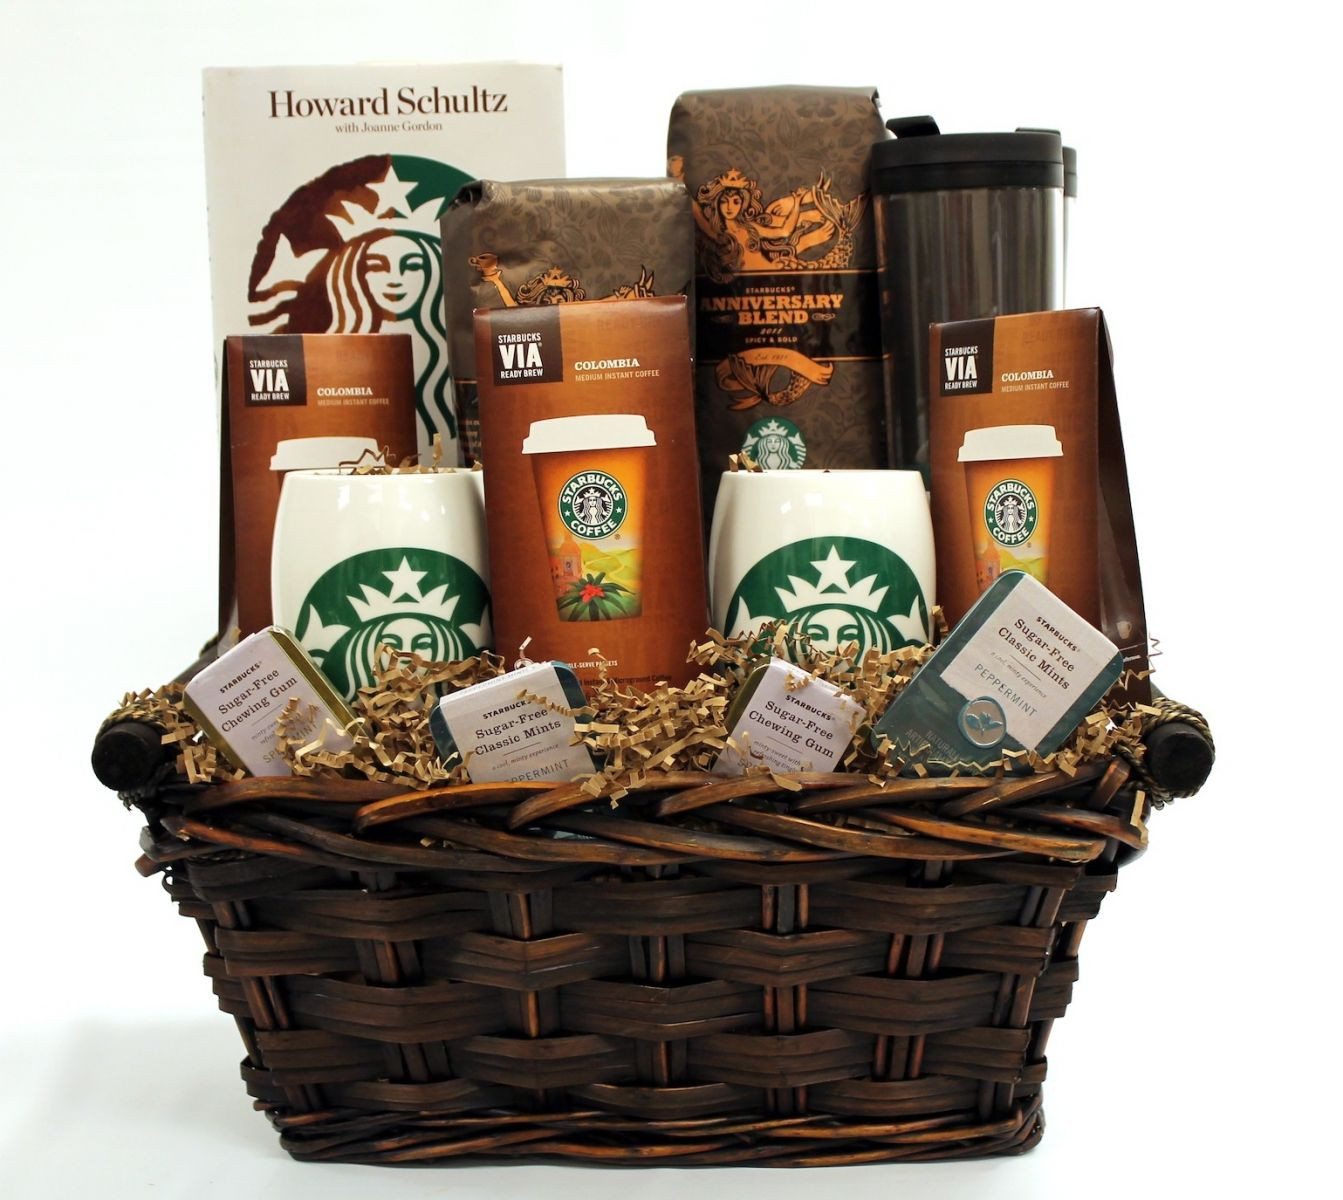 Coffee Basket Gift Ideas
 Support the HR Profession by Donating a Basket for the